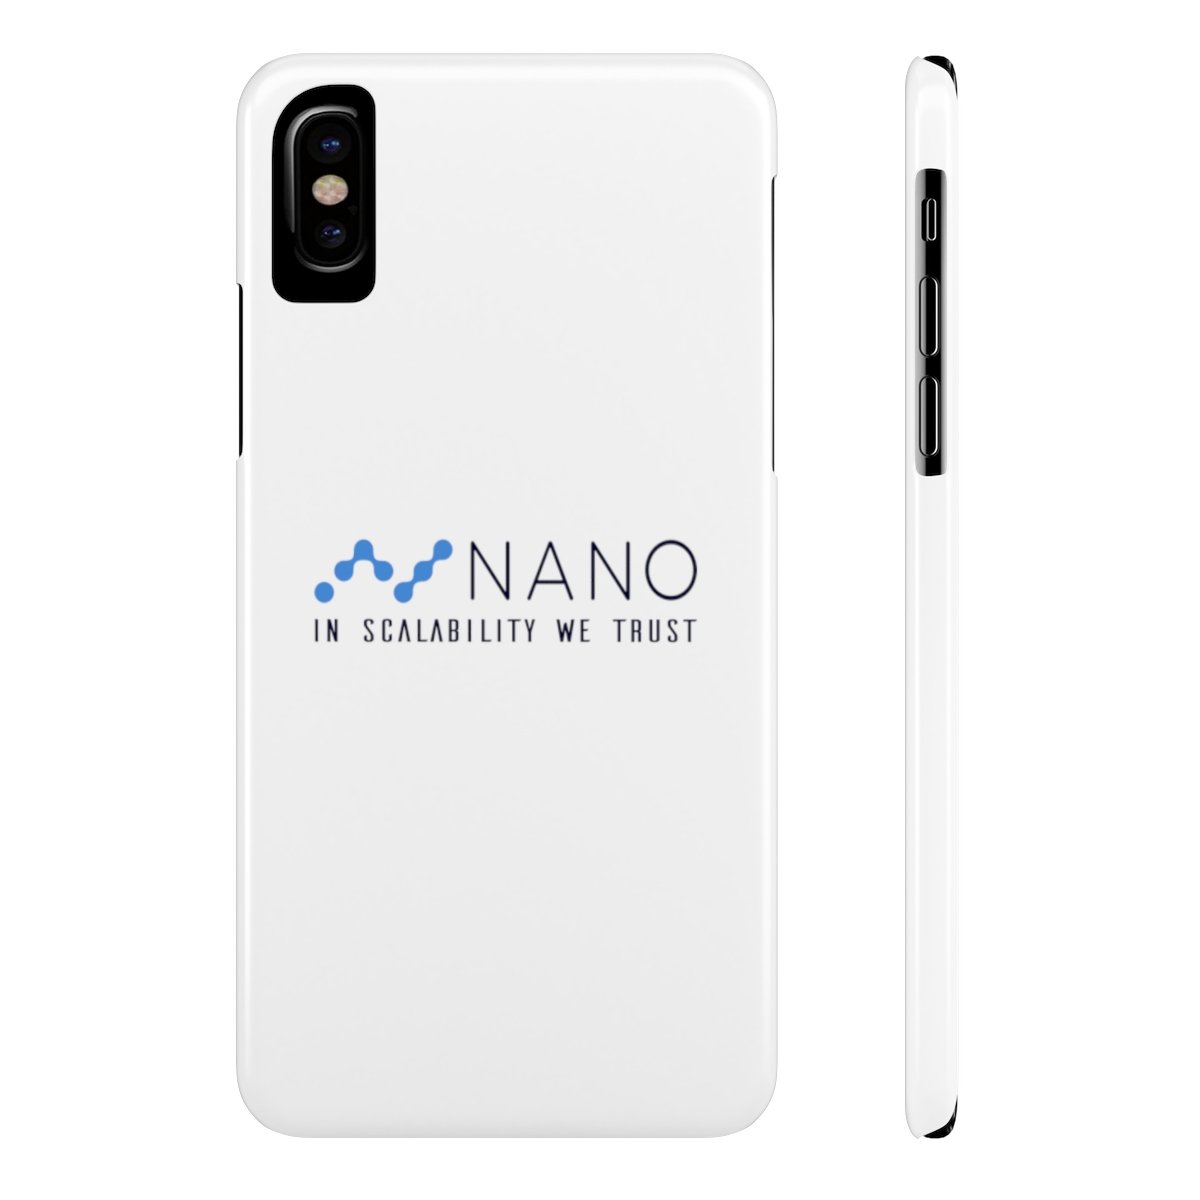 Nano, in scalability we trust - Case Mate Slim Phone Cases TCP1607 iPhone X Slim Official Crypto  Merch